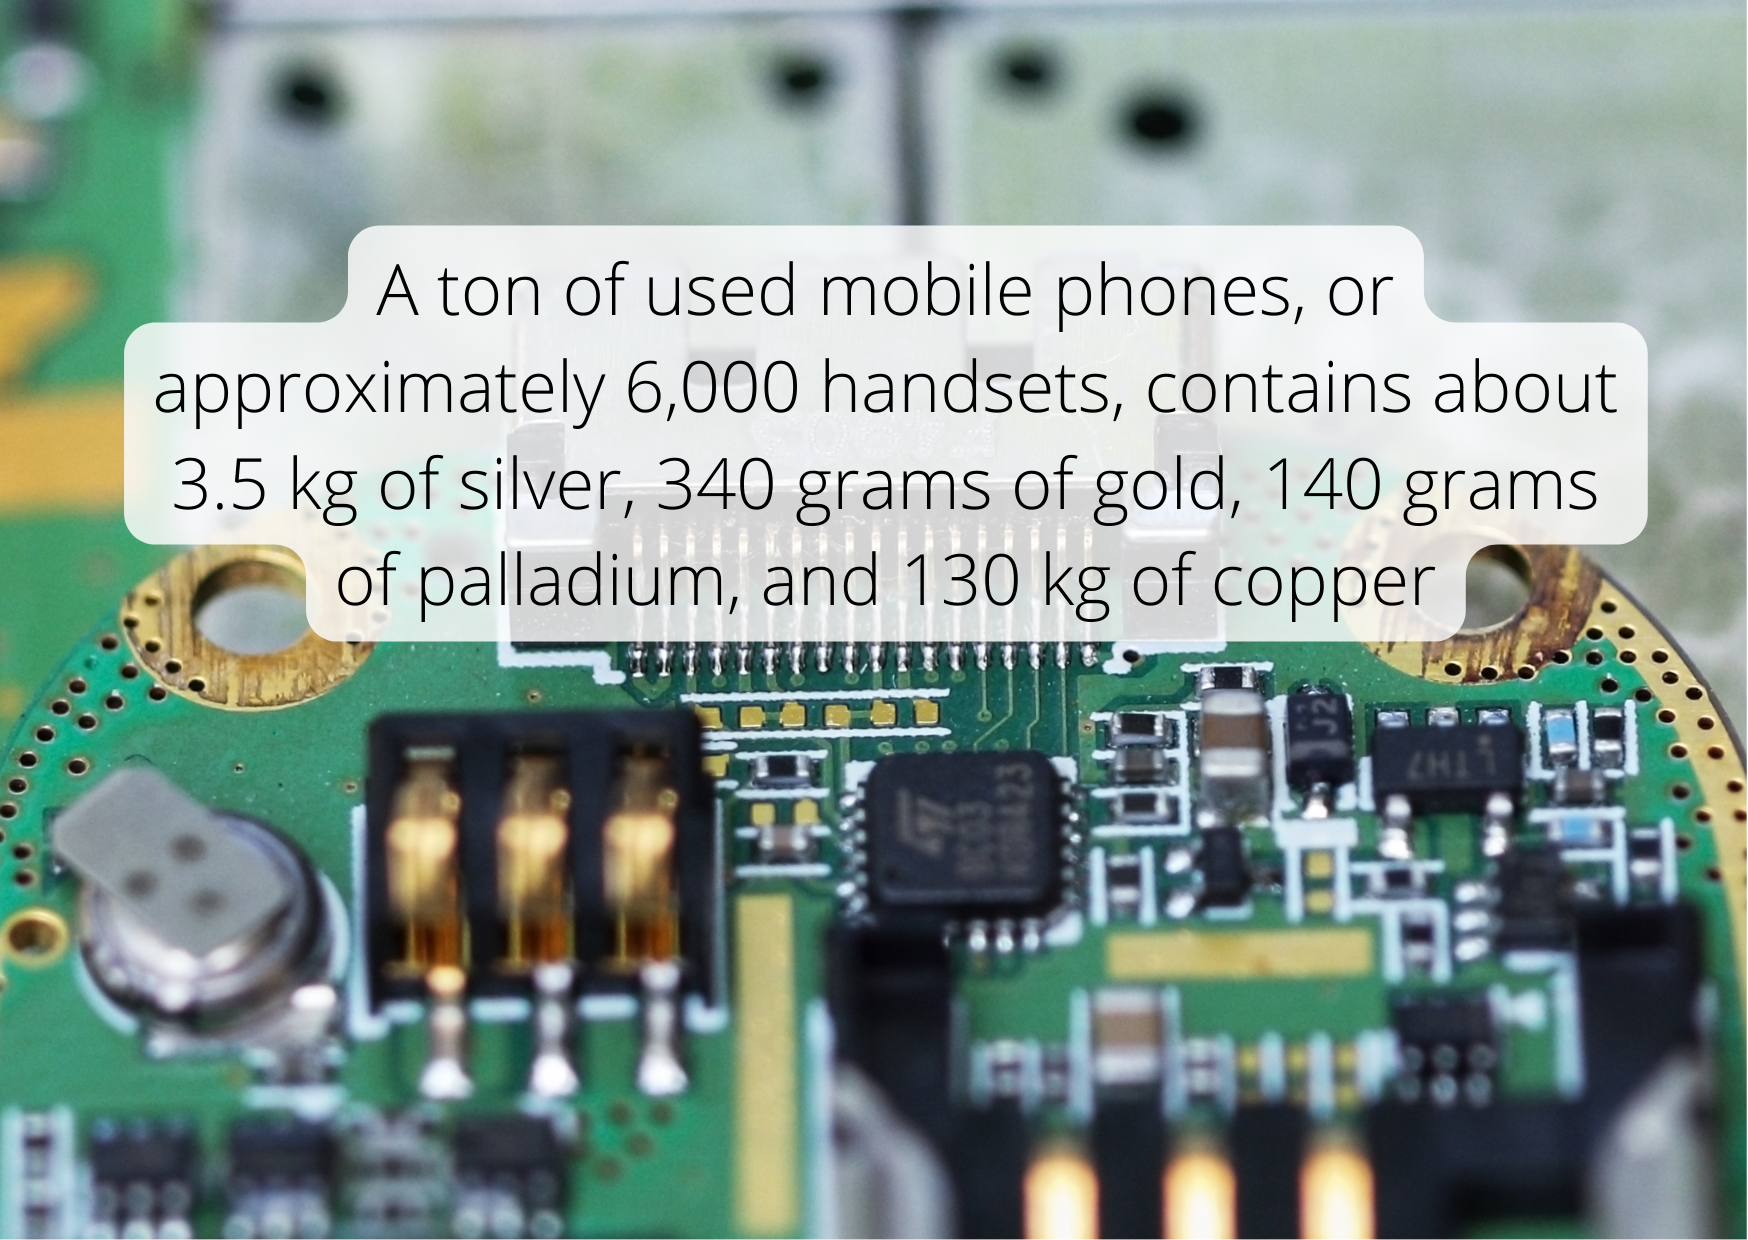 A ton of used mobile phones, or approximately 6,000 handsets, contains about 3.5 kg of silver, 340 grams of gold, 140 grams of palladium, and 130 kg of copper